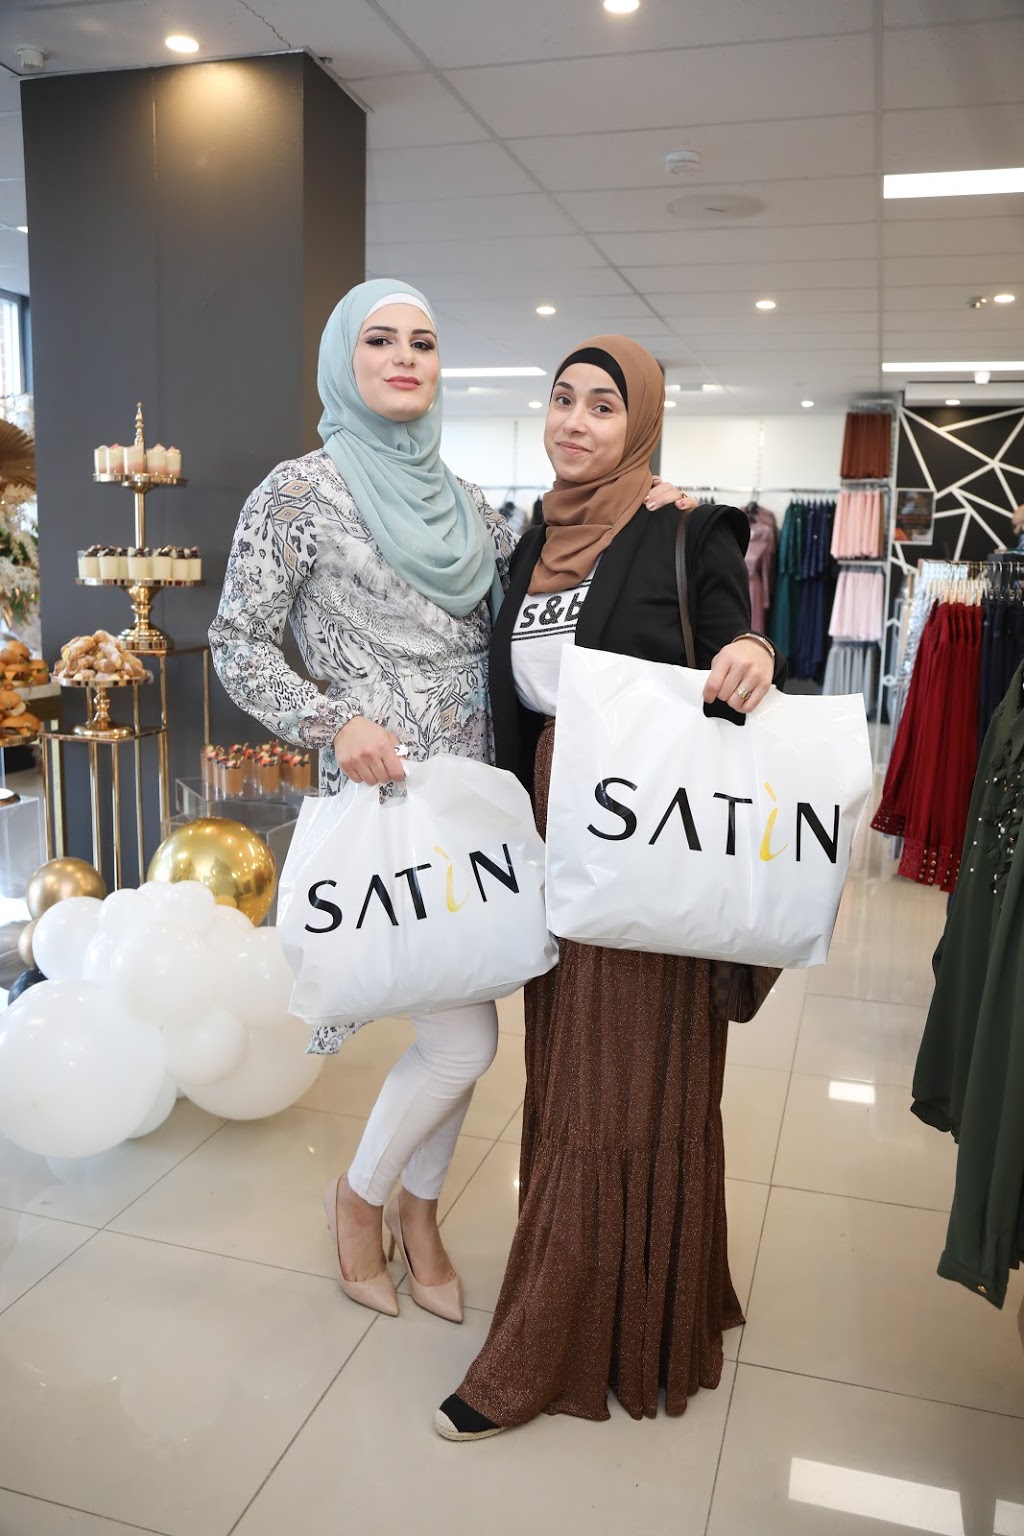 Satin Women’s Fashion | clothing store | Shop 3/504-508 Woodville Rd, Guildford NSW 2161, Australia | 0298921432 OR +61 2 9892 1432